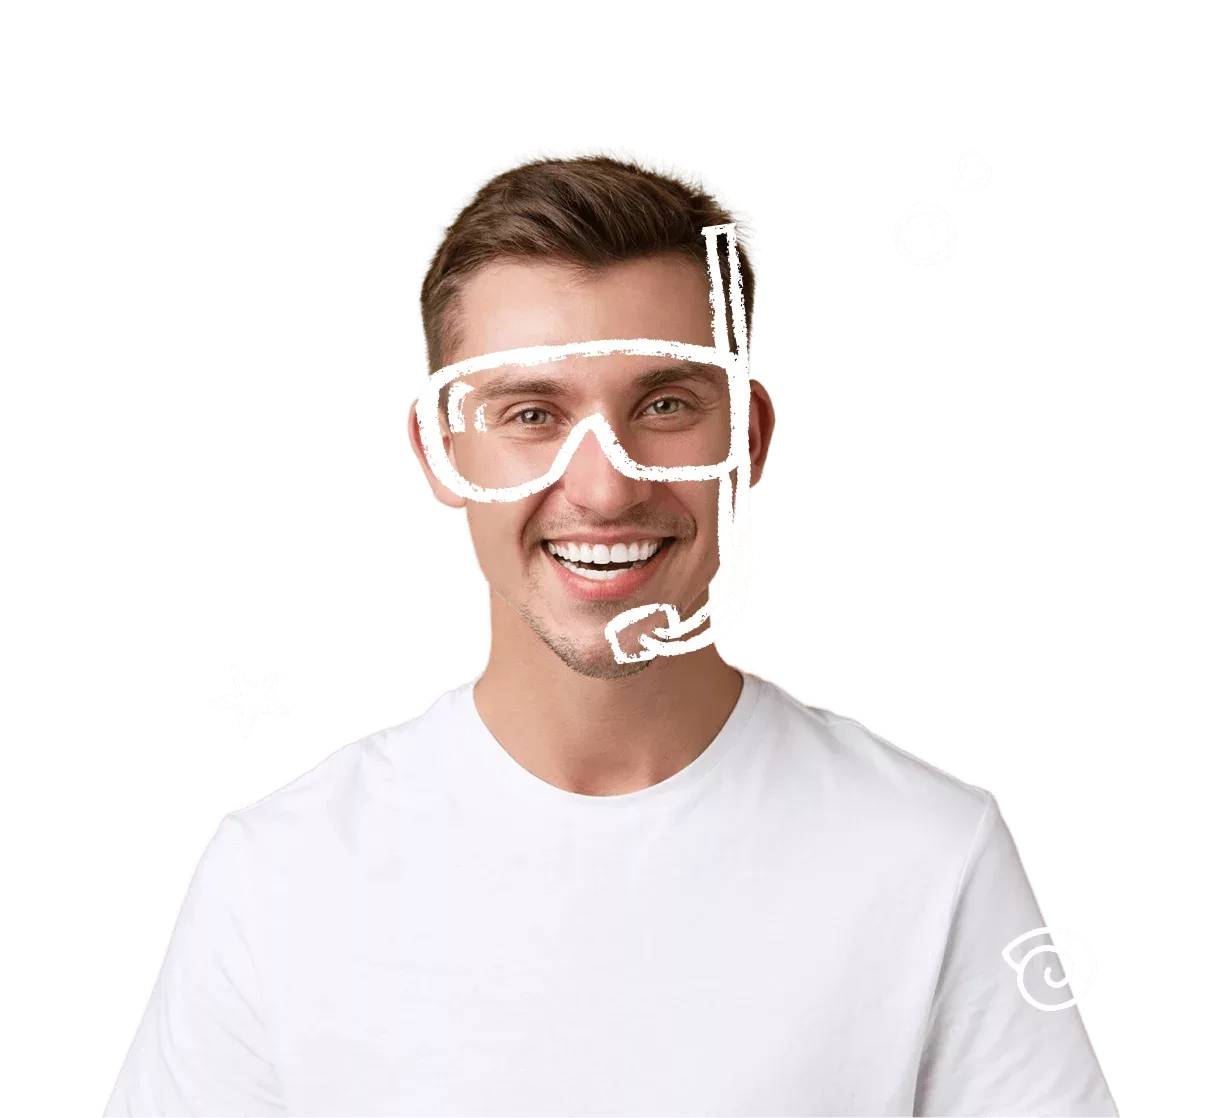 Smiling man with playful illustration